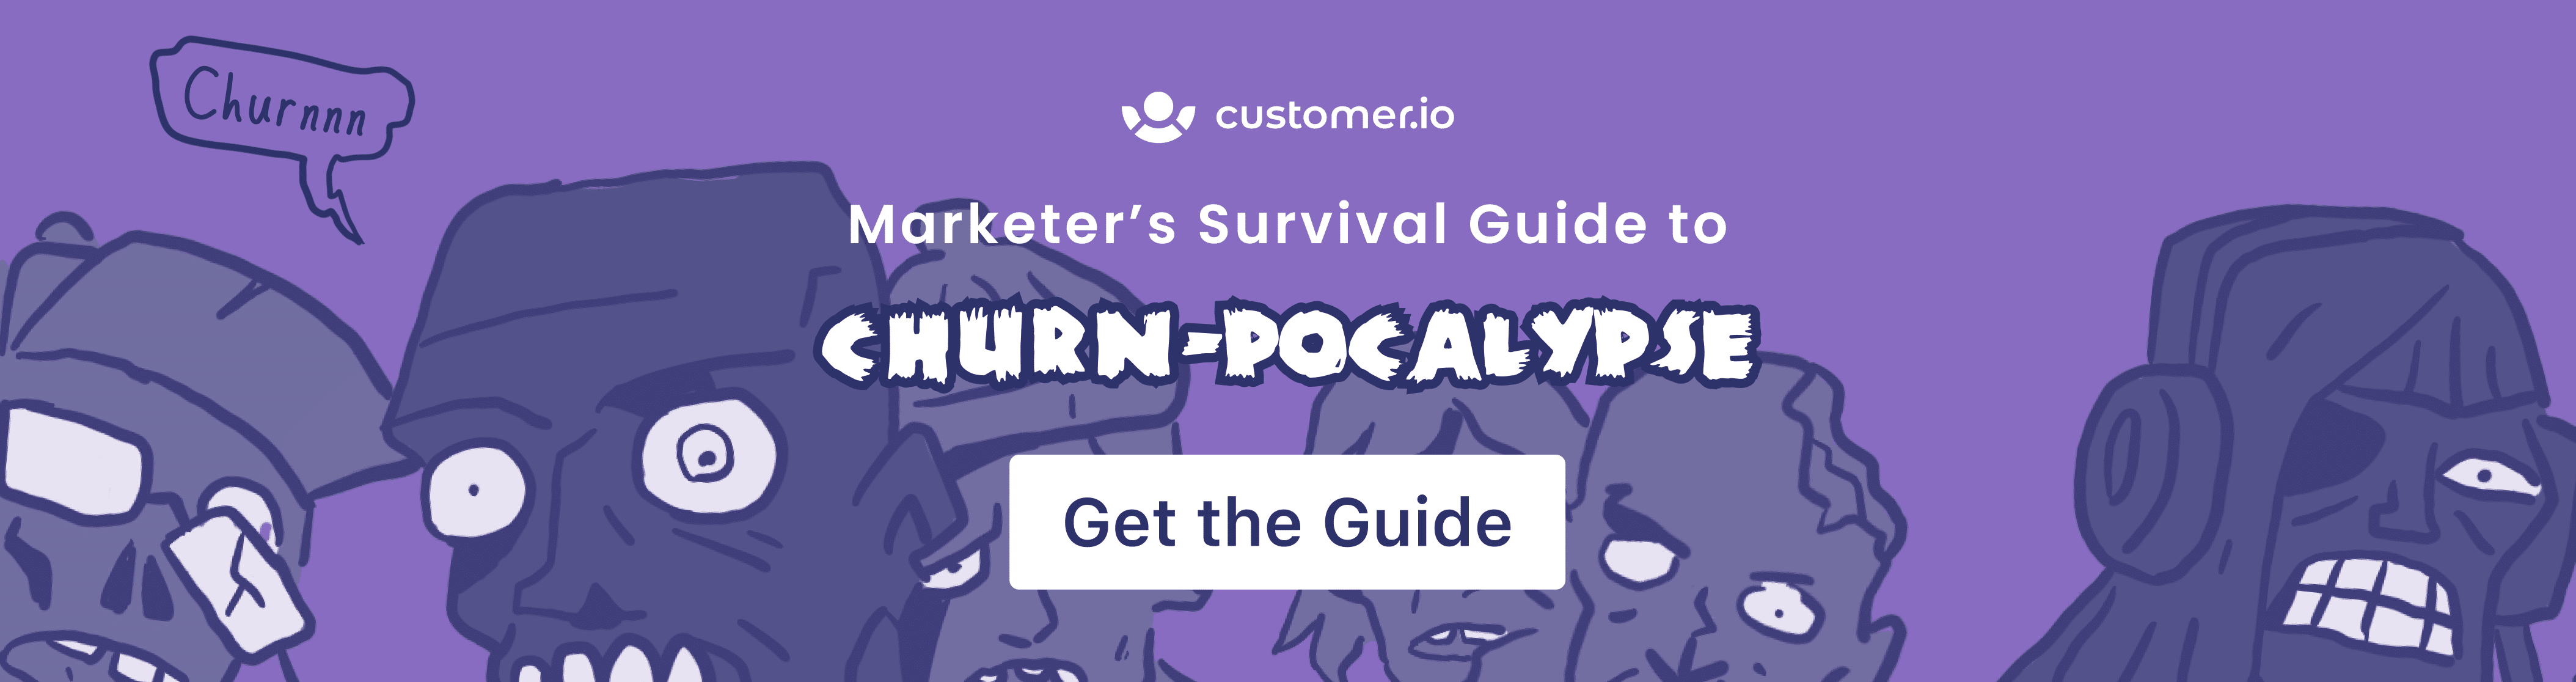 The Marketer's Survival Guide to the Churn-pocolypse